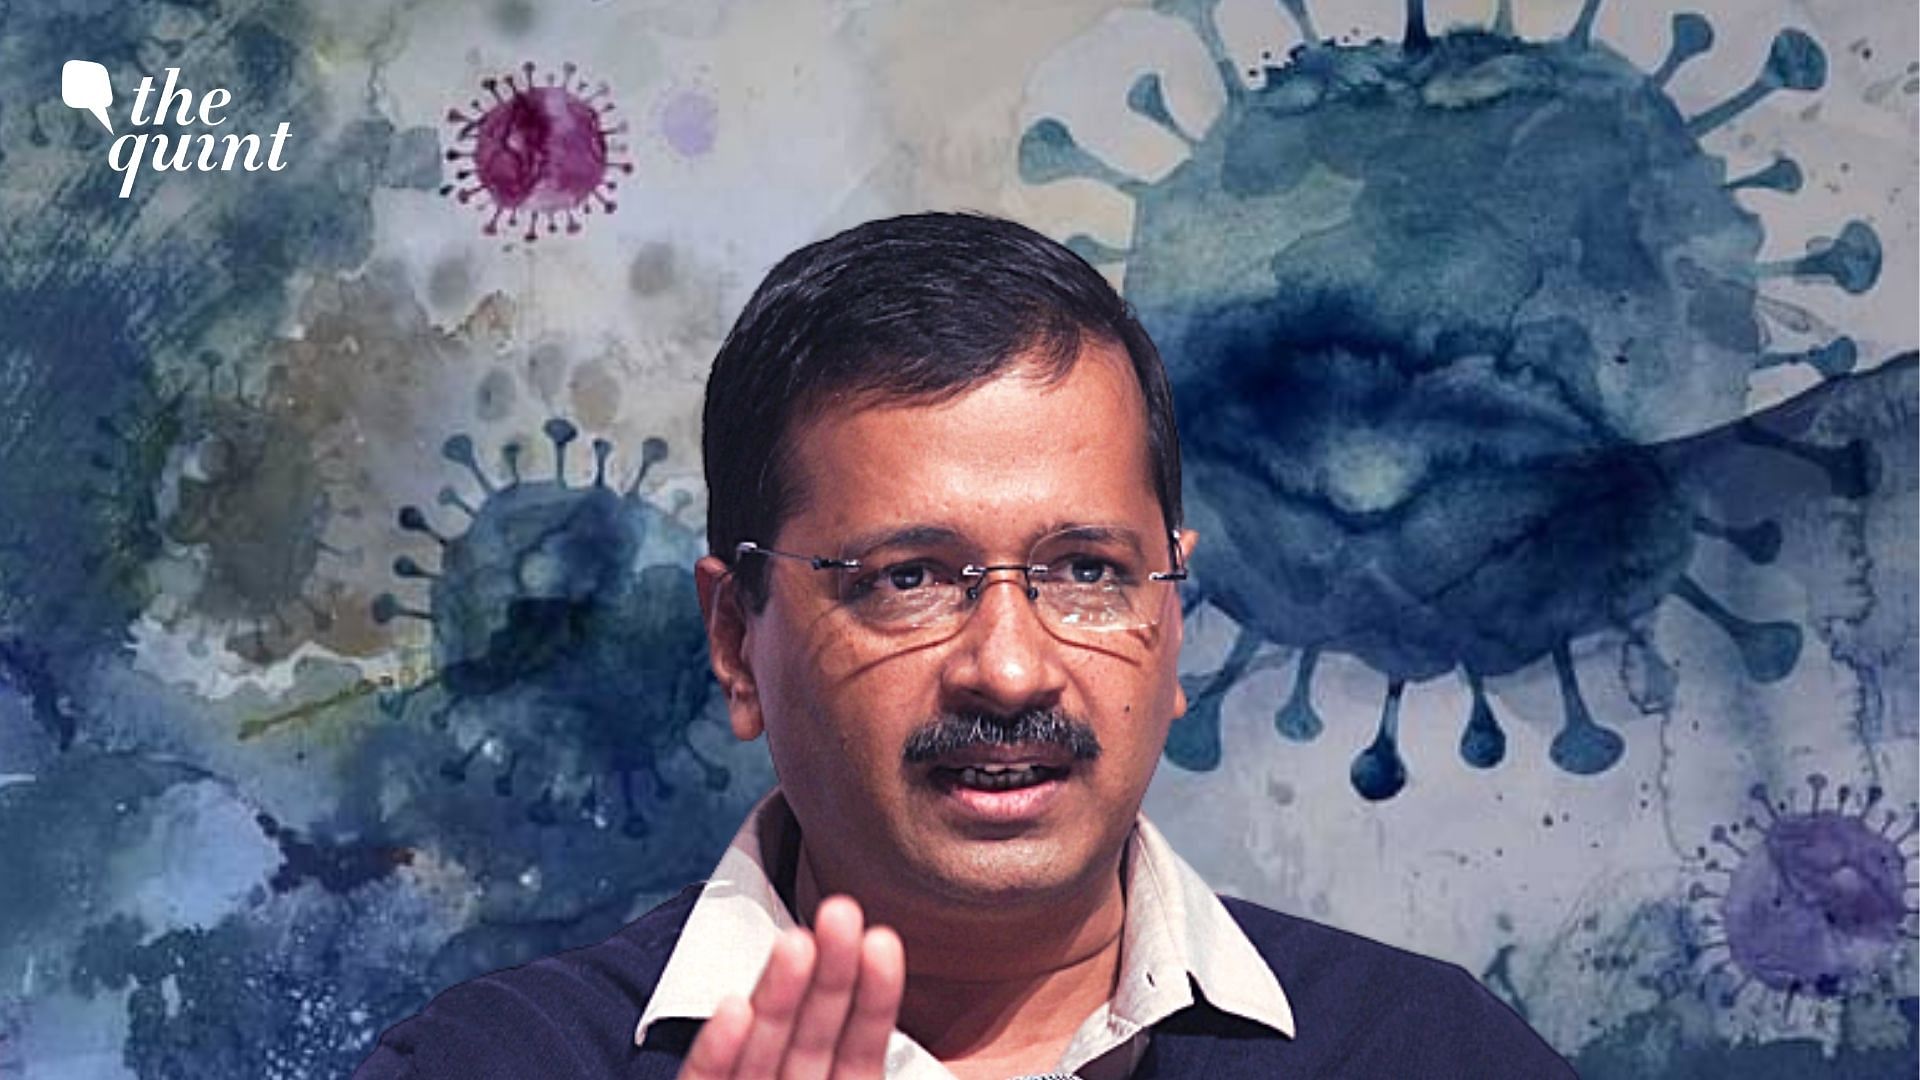 Stating that a new strain of coronavirus, found in Singapore, is said to be “very dangerous” for children, Delhi Chief Minister Arvind Kejriwal, on Tuesday, 18 May, asked the Centre to immediately cancel all flights from Singapore.